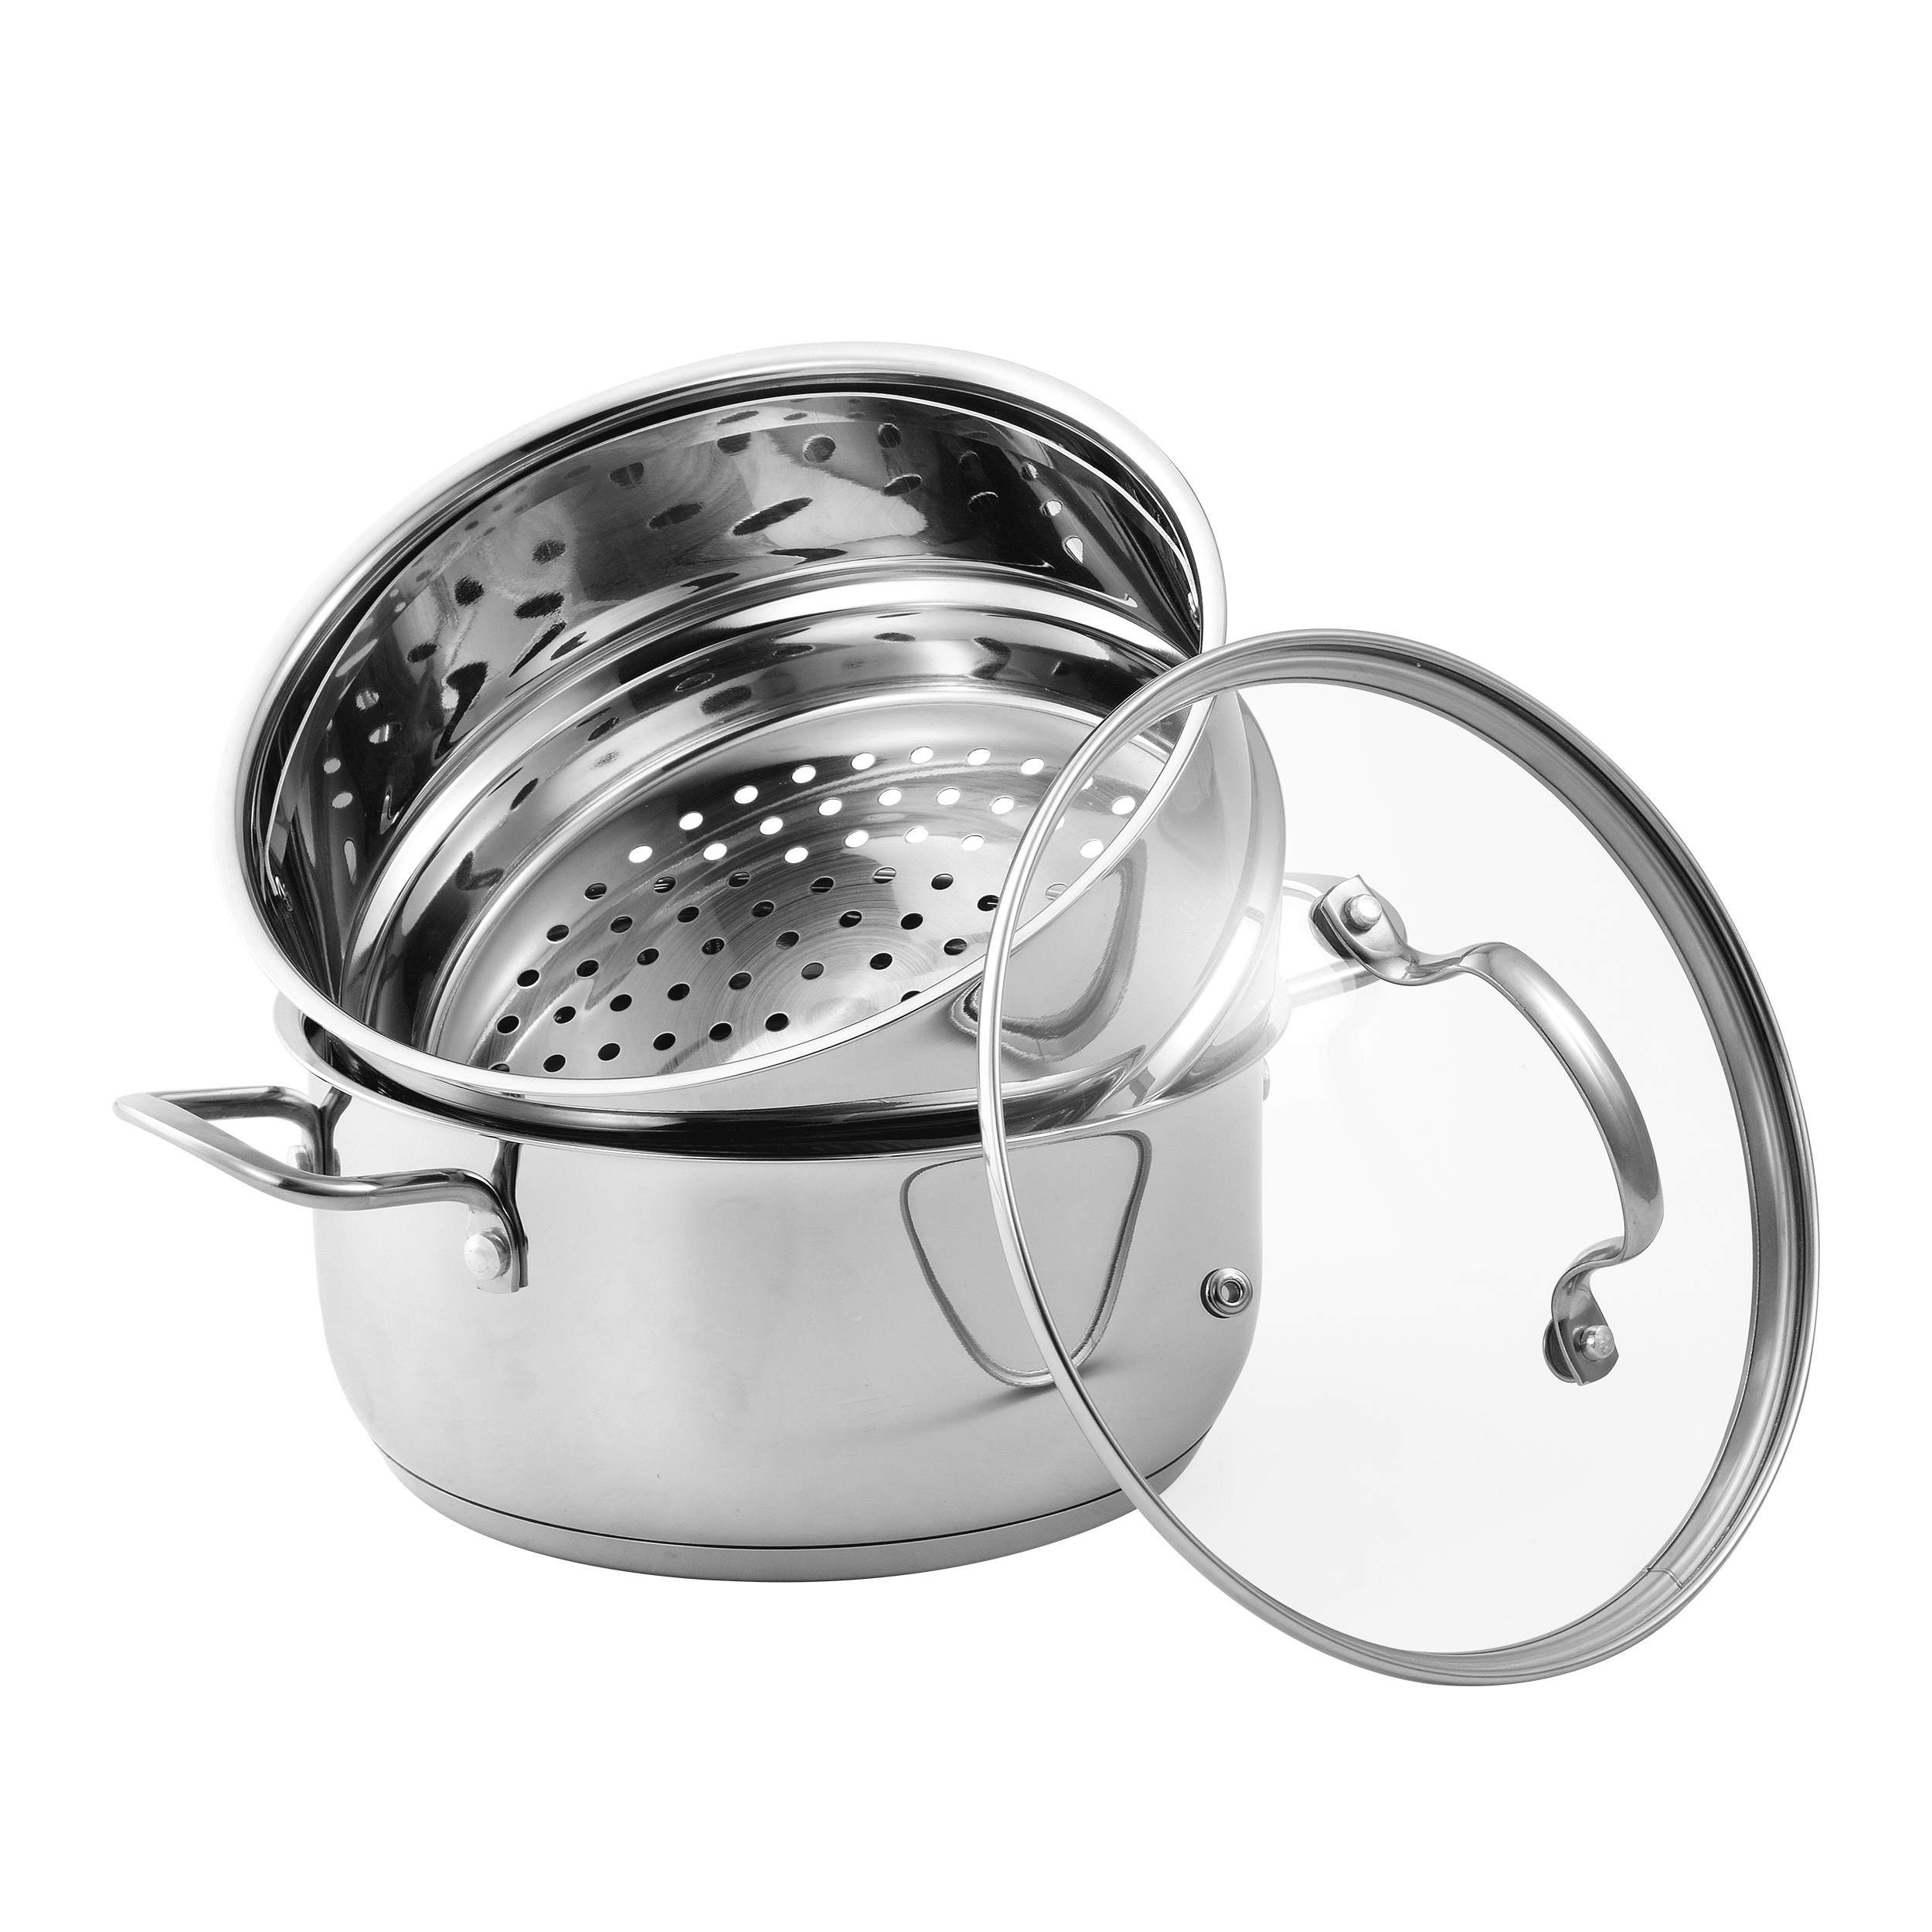 Bergner Ailantic Series Stainless Steel 2-qt Saucepan with Lid